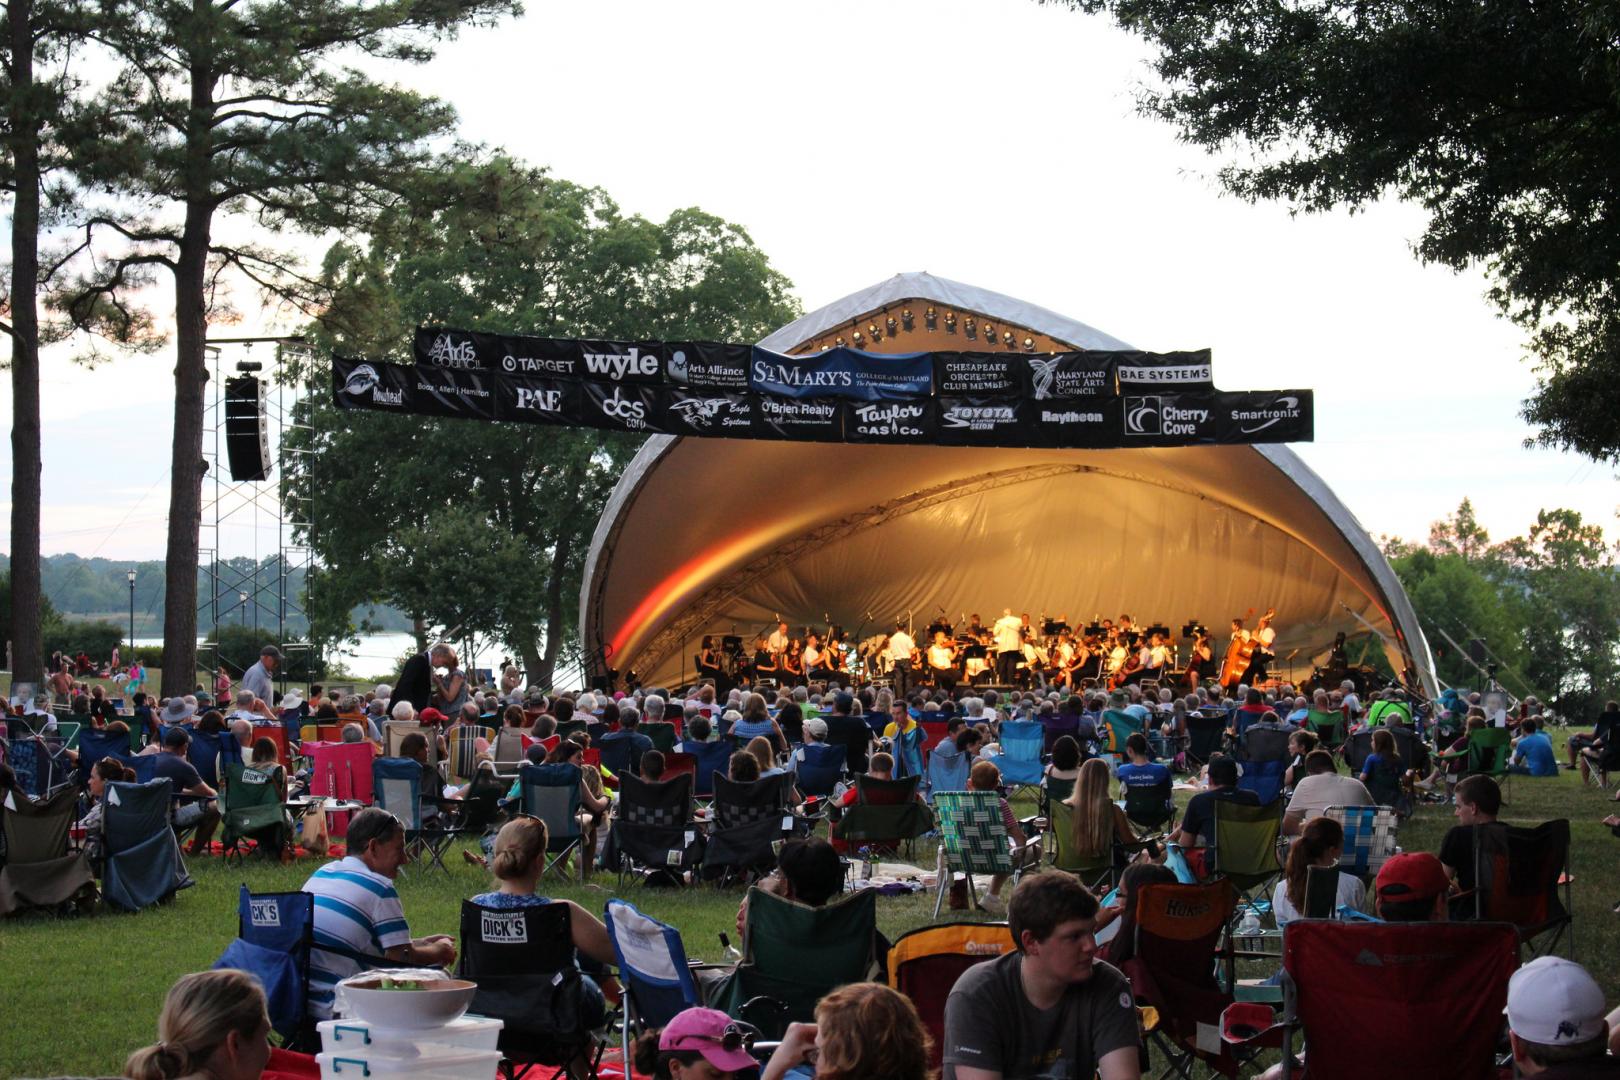 A crowd of concert goers watch the orchestra under a tent in front of the St. Mary's River